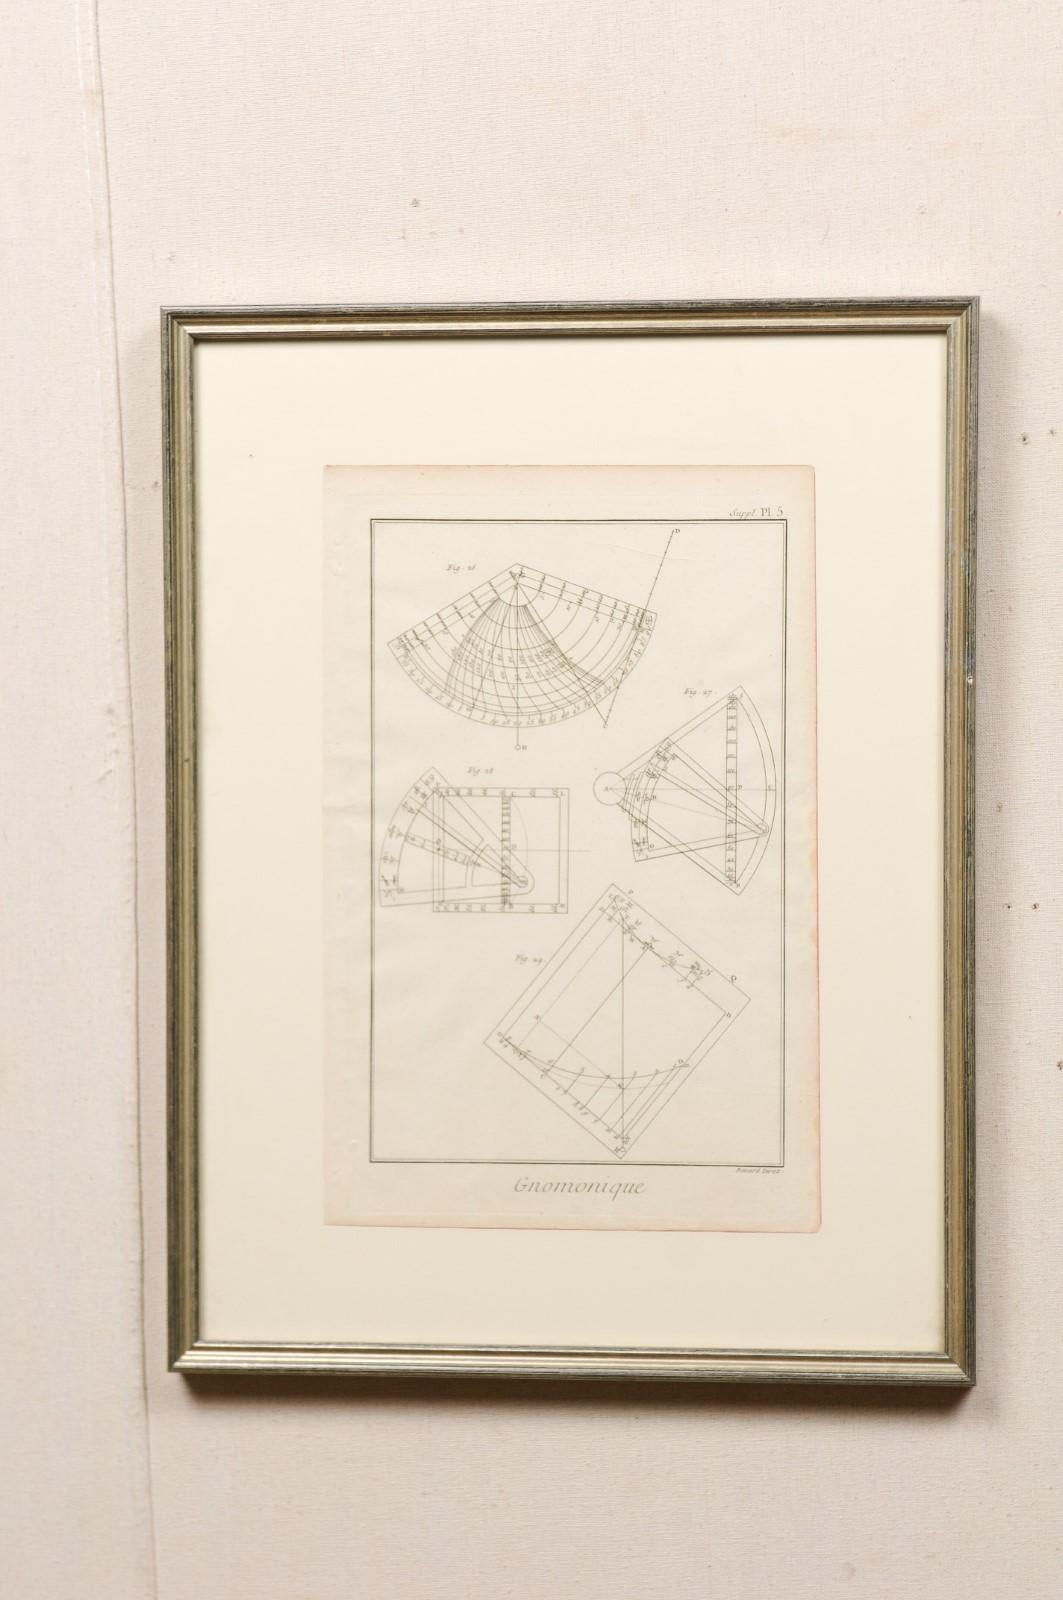 A pair of framed French 18th century Bernard Direx renderings. This is a pair of framed geometric renderings from French artist Bernard Direx in custom silvered wood frames. Each rendering was originally part of a larger book, and are copper plate